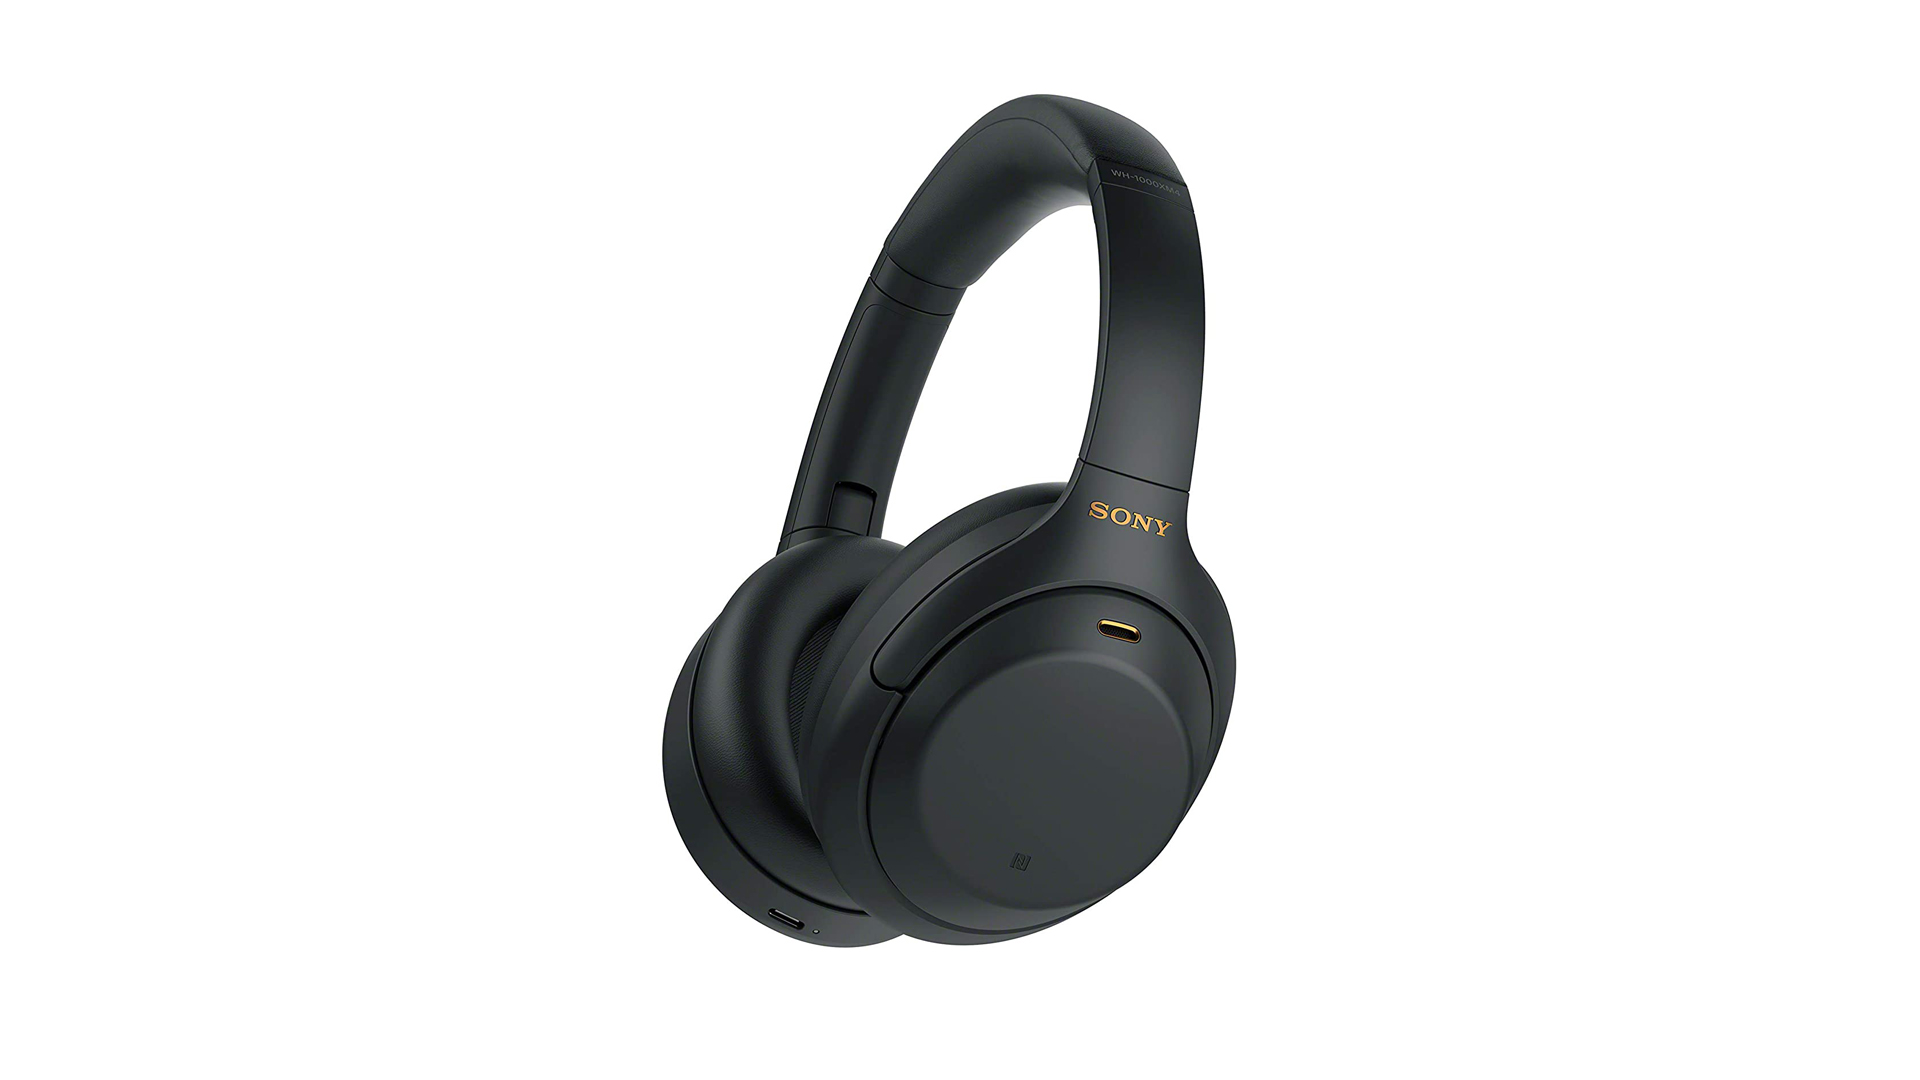 The Sony WH-1000XM4 noise canceling headphones in black against a white background.